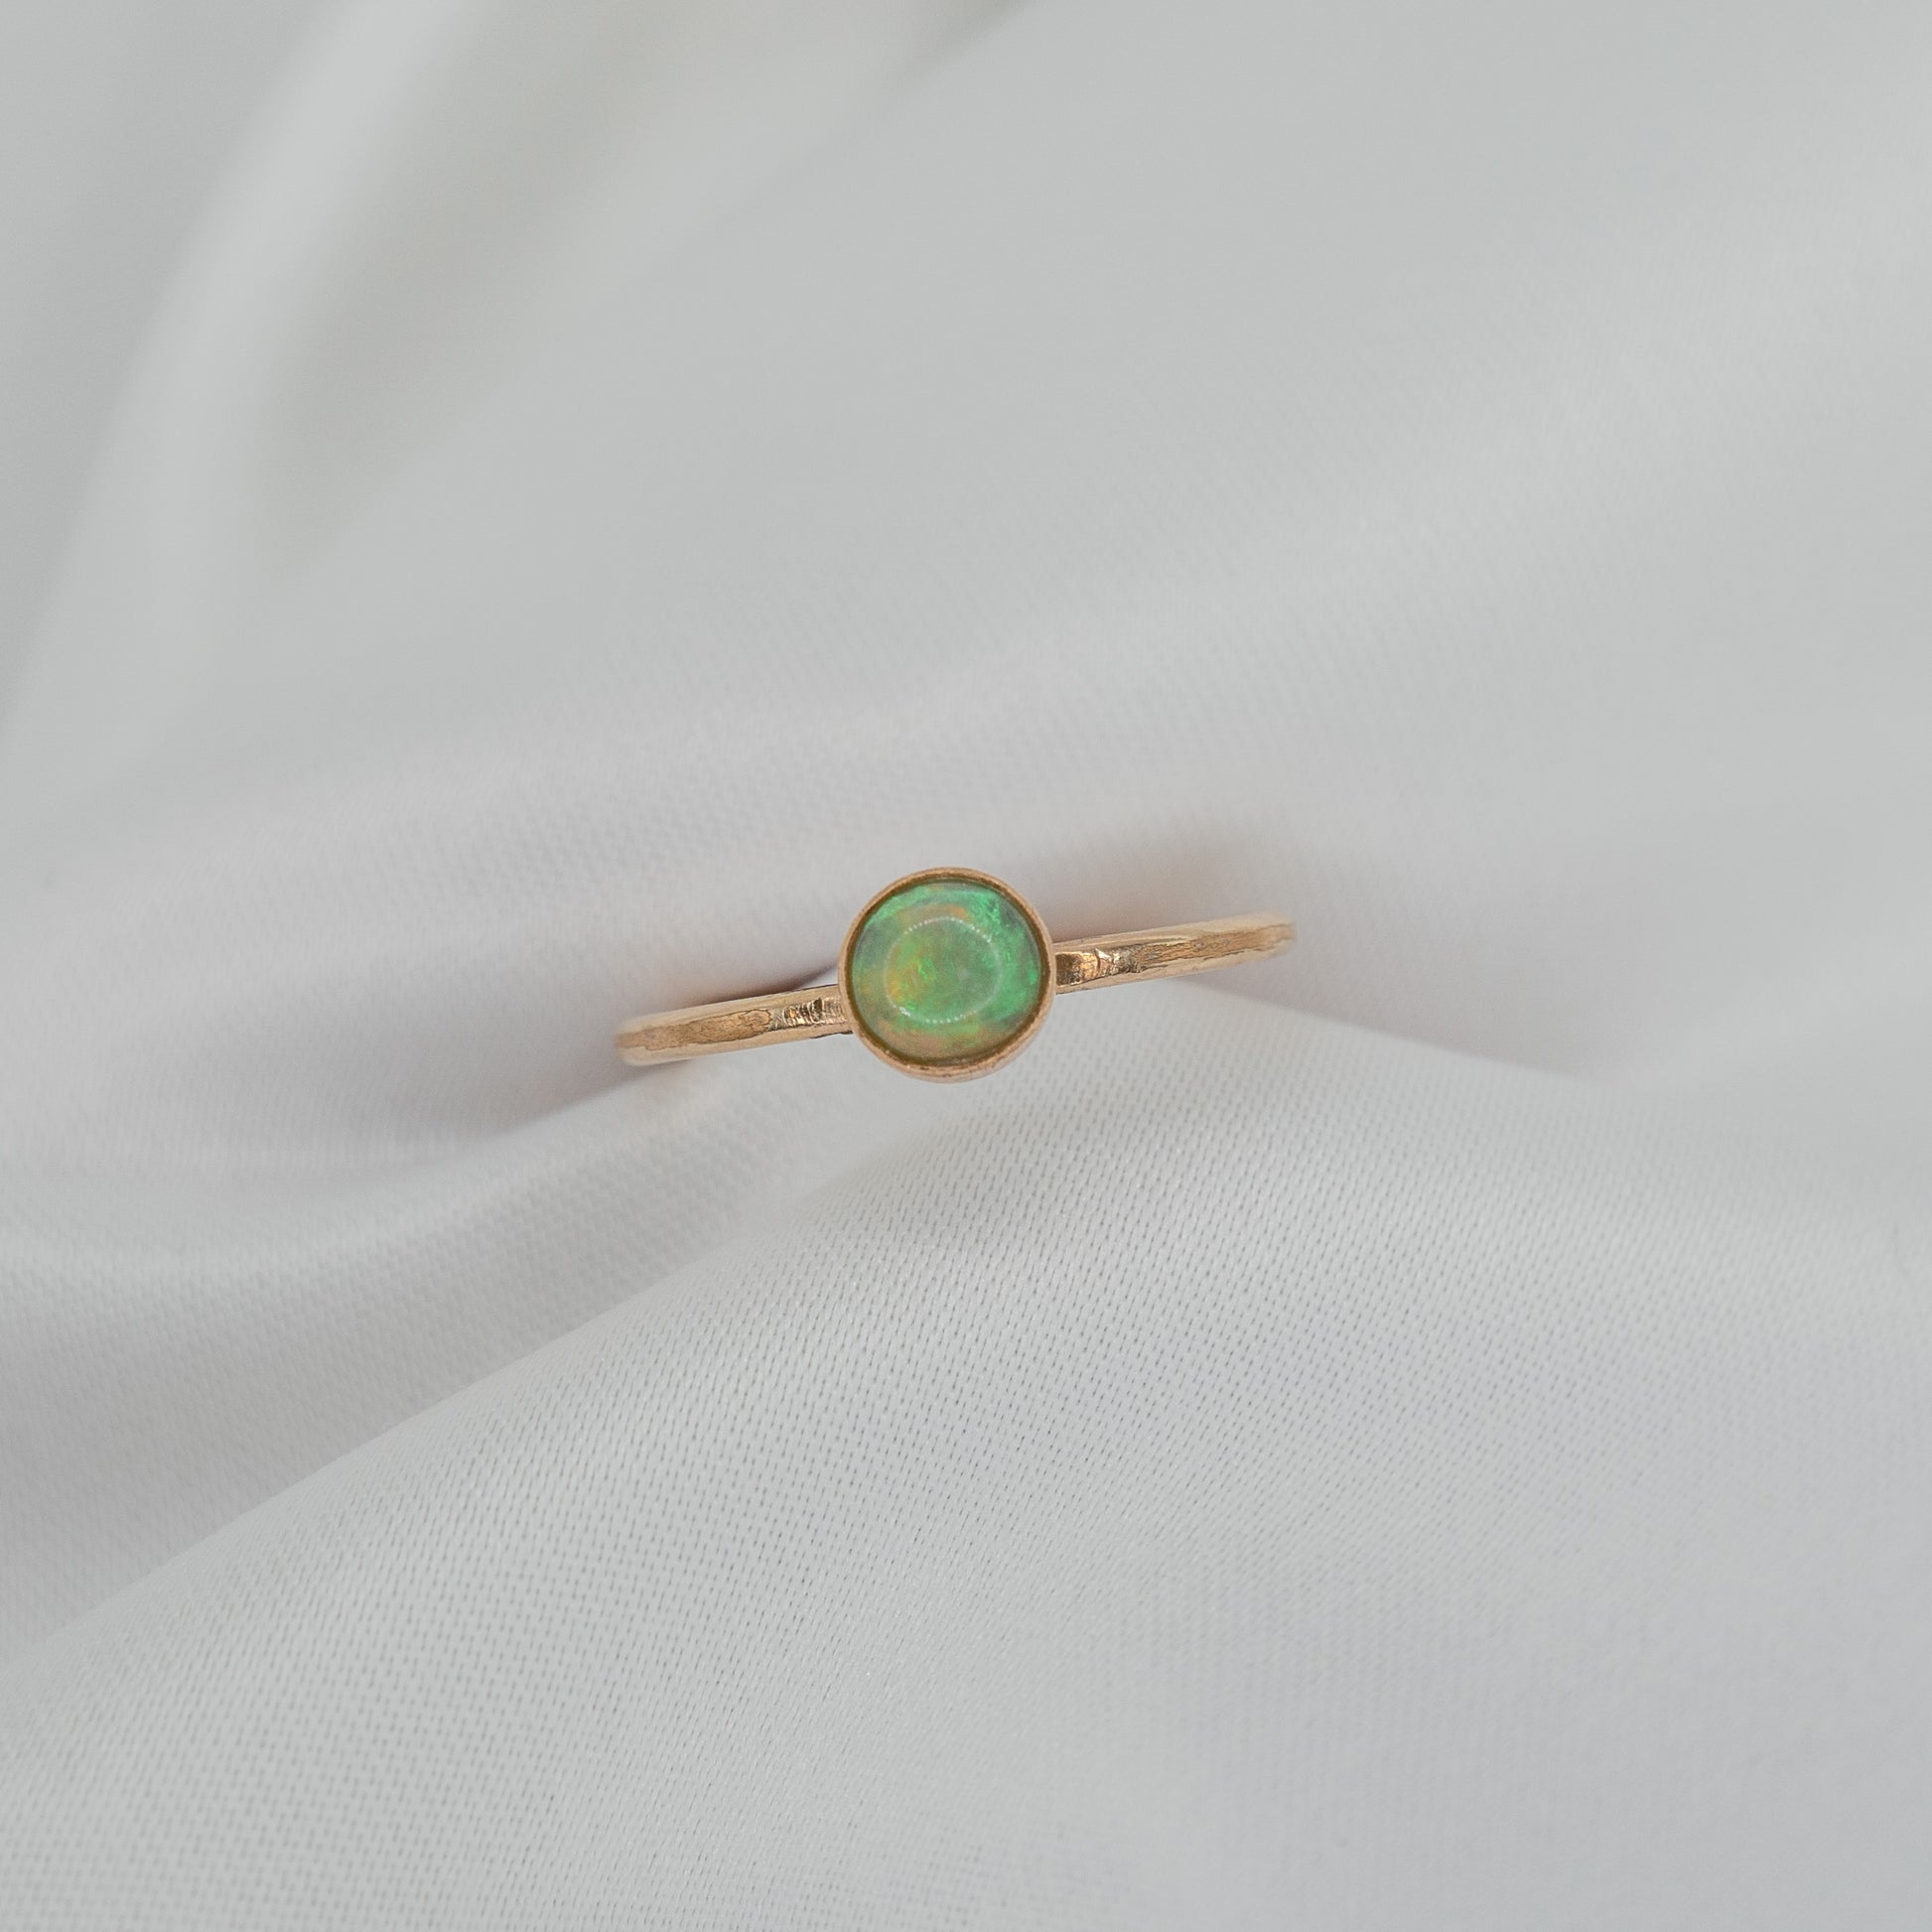 Gold Filled Opal Ring - shot on white - aerial view